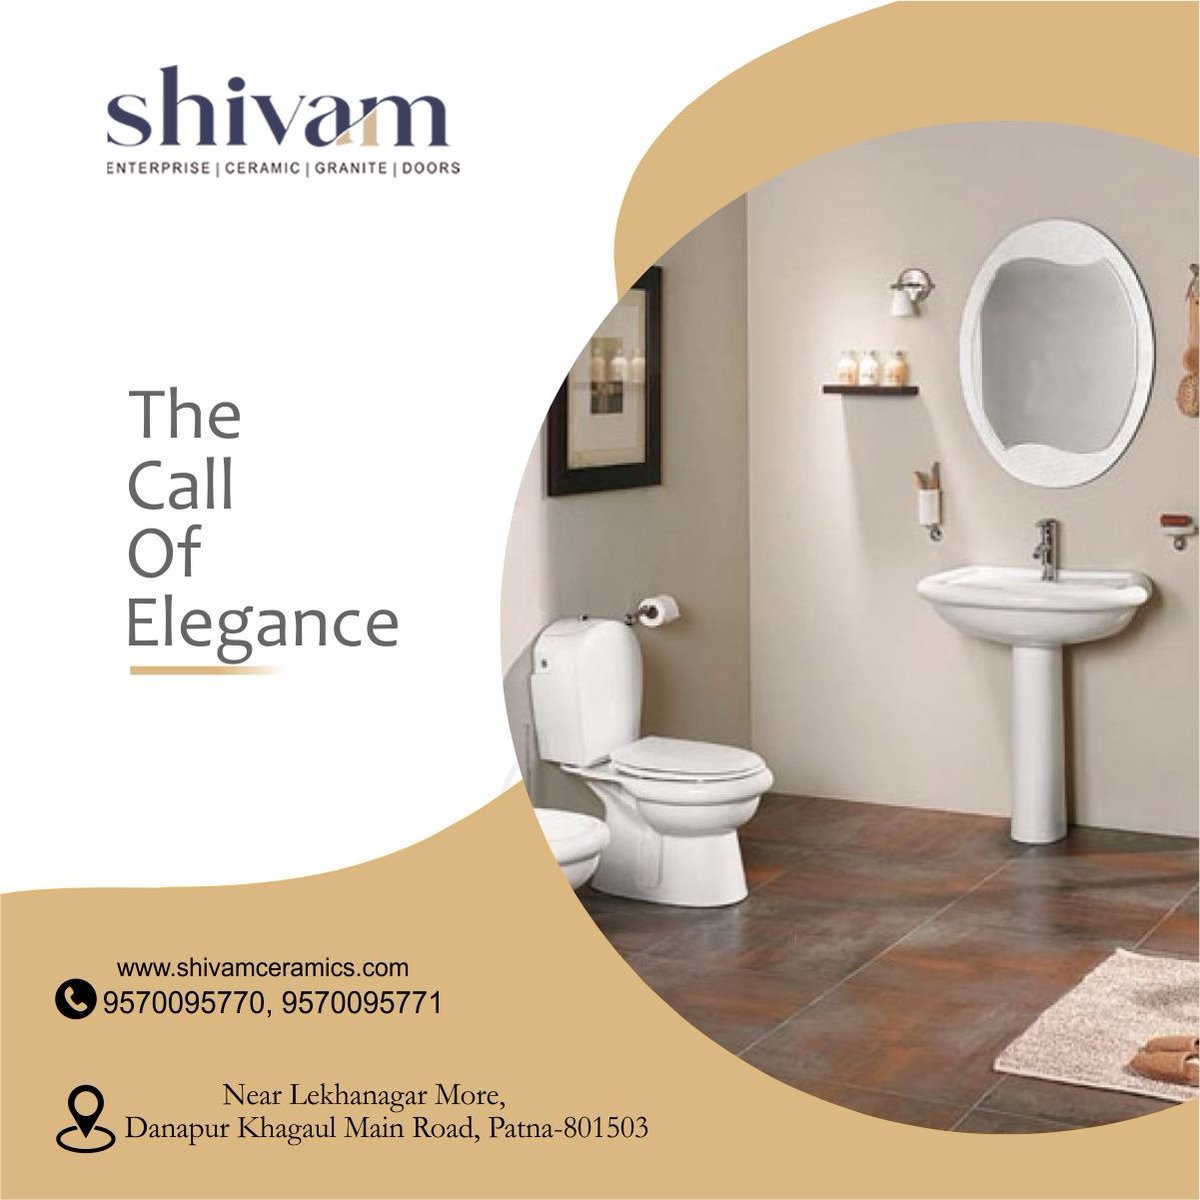 Experience the elegance in your bathroom interior with the all new international quality tiles, doors and granites at the best price like never before✌️
Shivam Ceramic✌️
#shivamgranites  #shivamdoors #ShivamTiles #ShivamBathware #ZameenSeJudey #LargestTileCollection